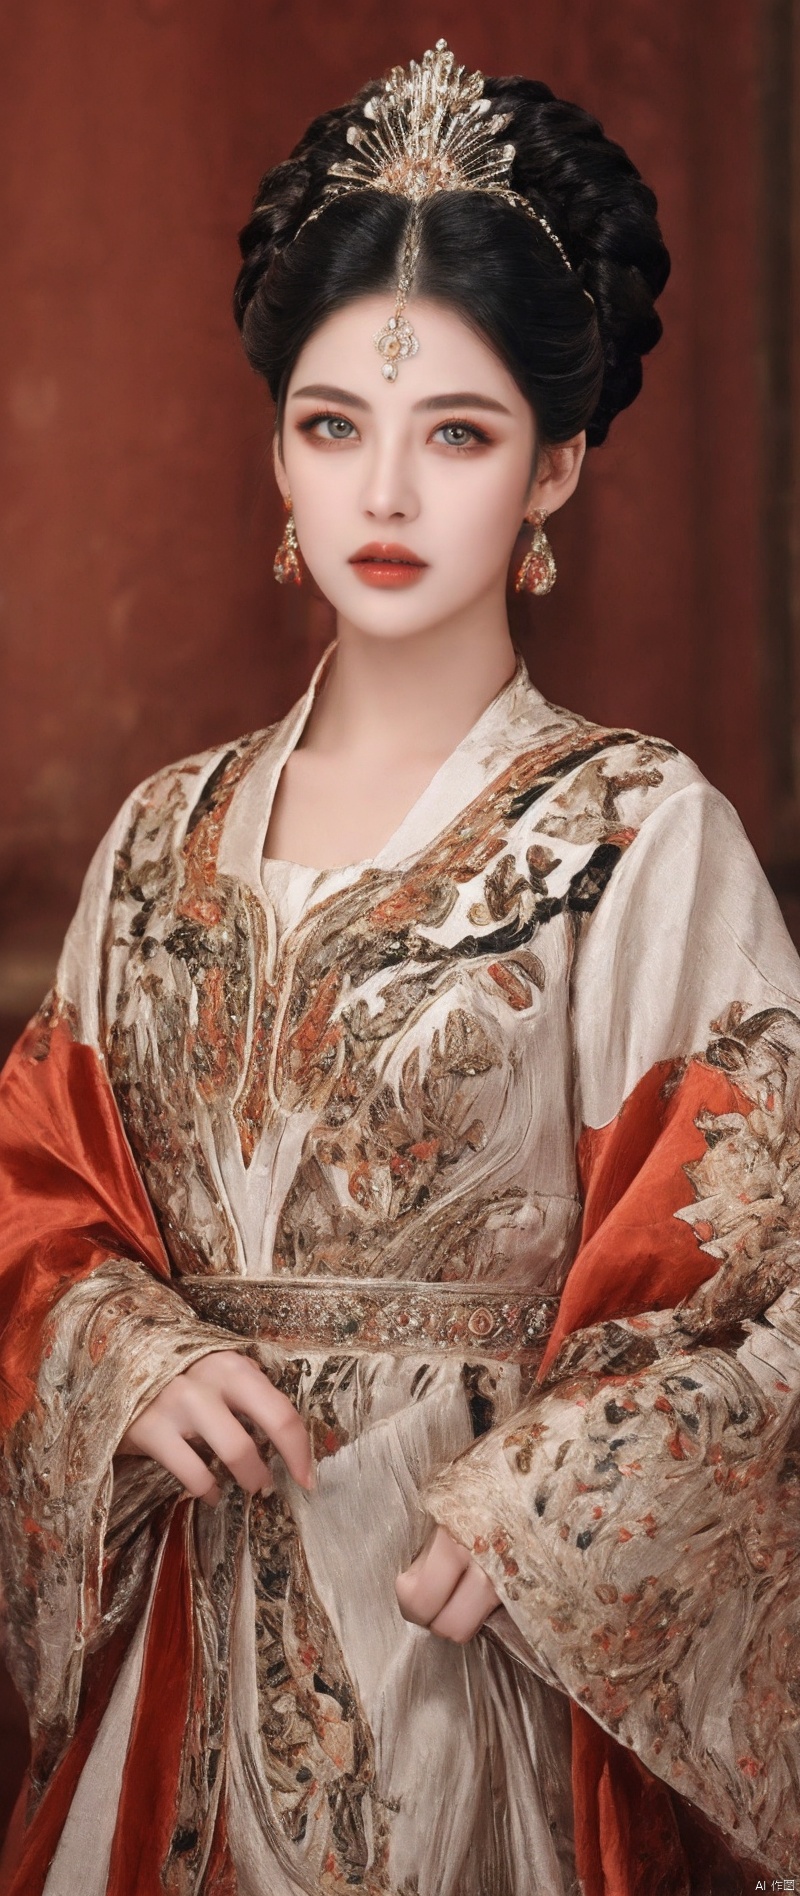 tmasterpiece,Highest image quality,Beautiful bust of a royal lady,Delicate black hairstyle,Amber eyes are clear,Embellished with a dazzling array of intricate jewelry,super detailing,upscaled。